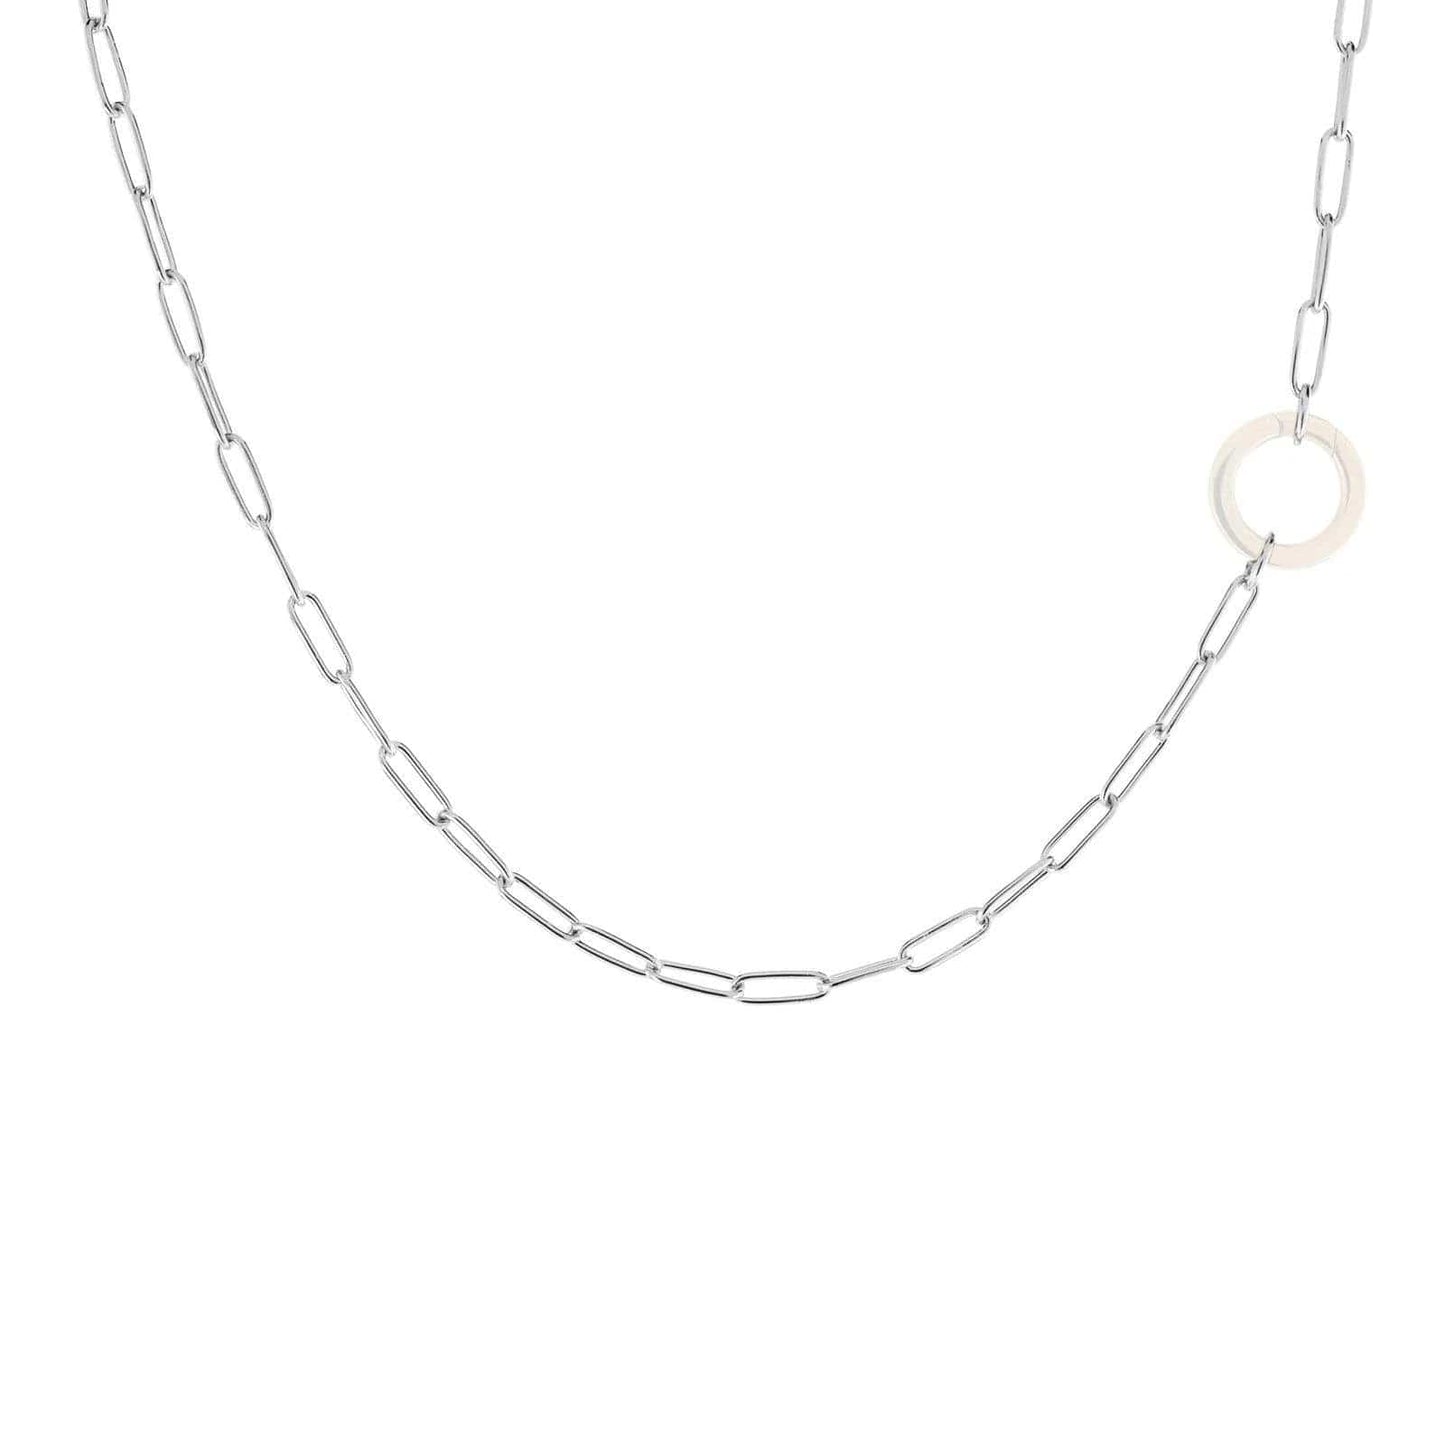 CHN 2.9mm Silver Link Chain With Clasp - No Hinge